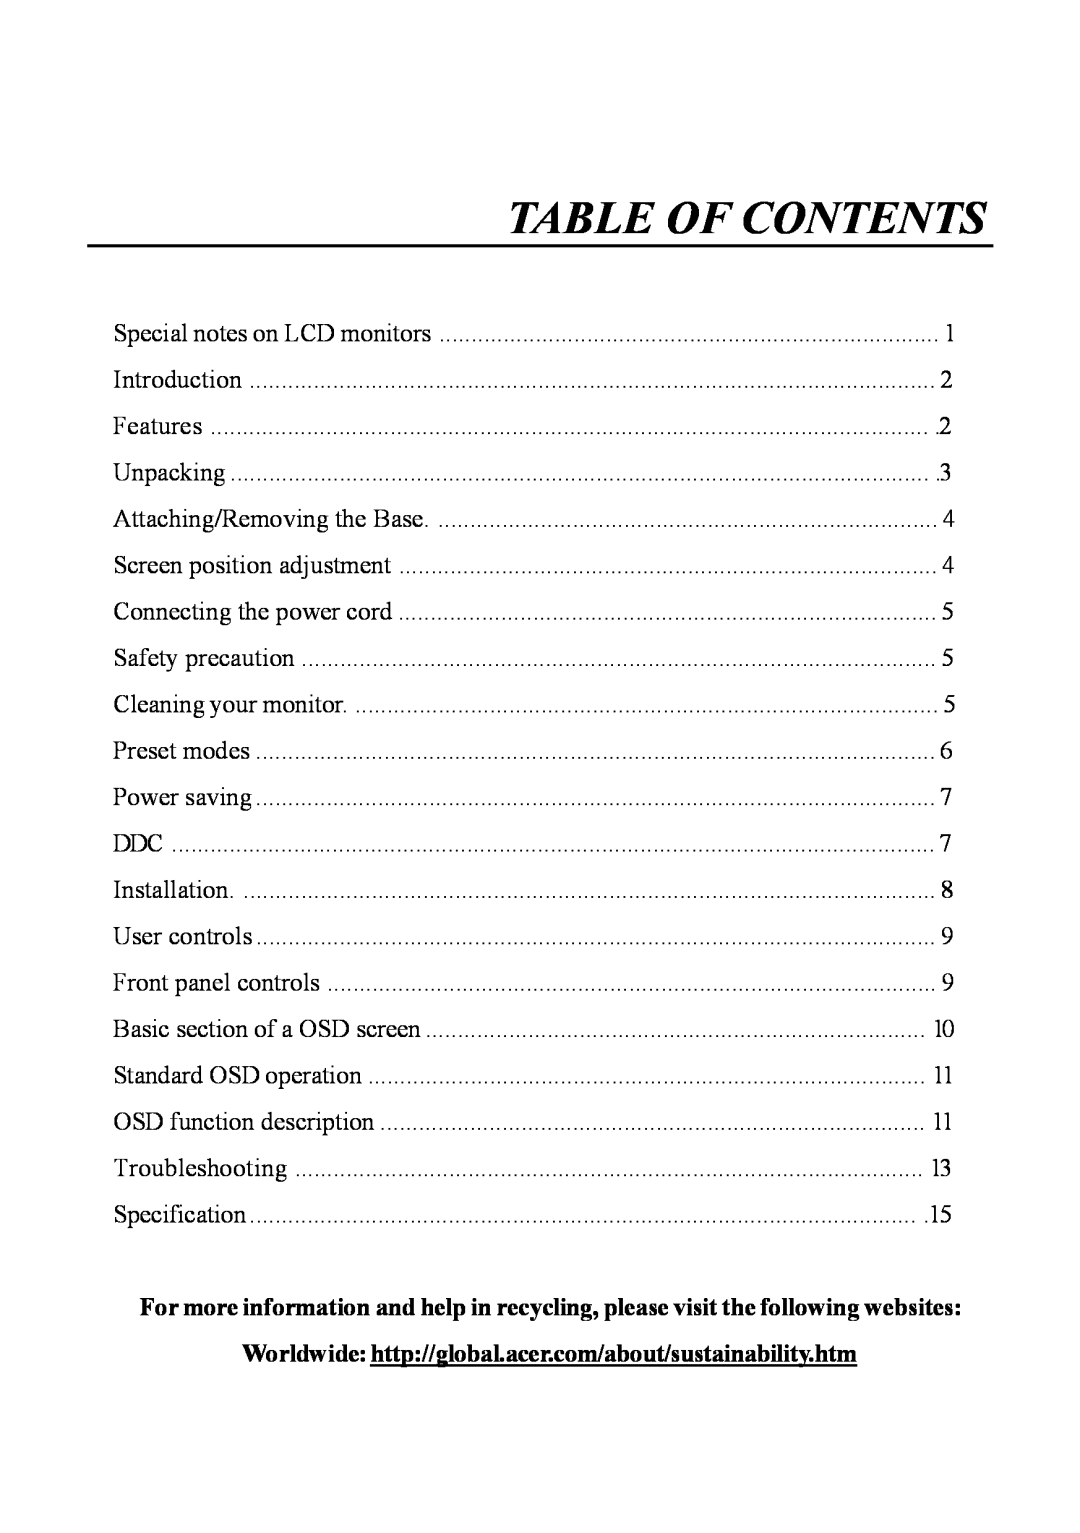 Acer al200 user manual Worldwide http//global.acer.com/about/sustainability.htm, Table Of Contents 